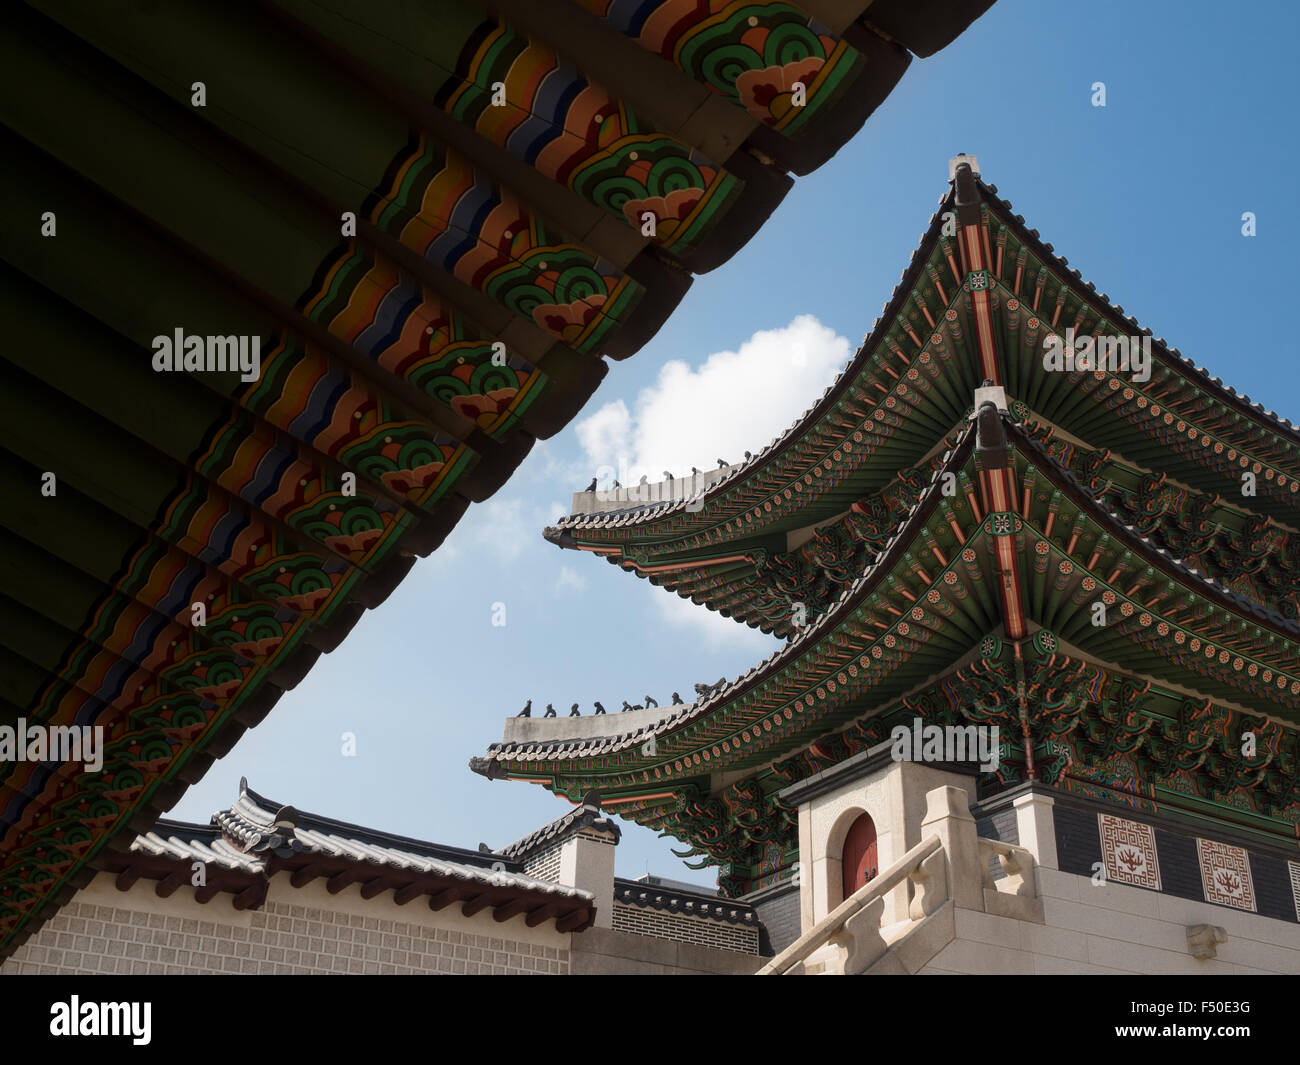 Colorful green roofs at the Gyeongbokgung Palace (경복궁) in Seoul, South Korea Stock Photo